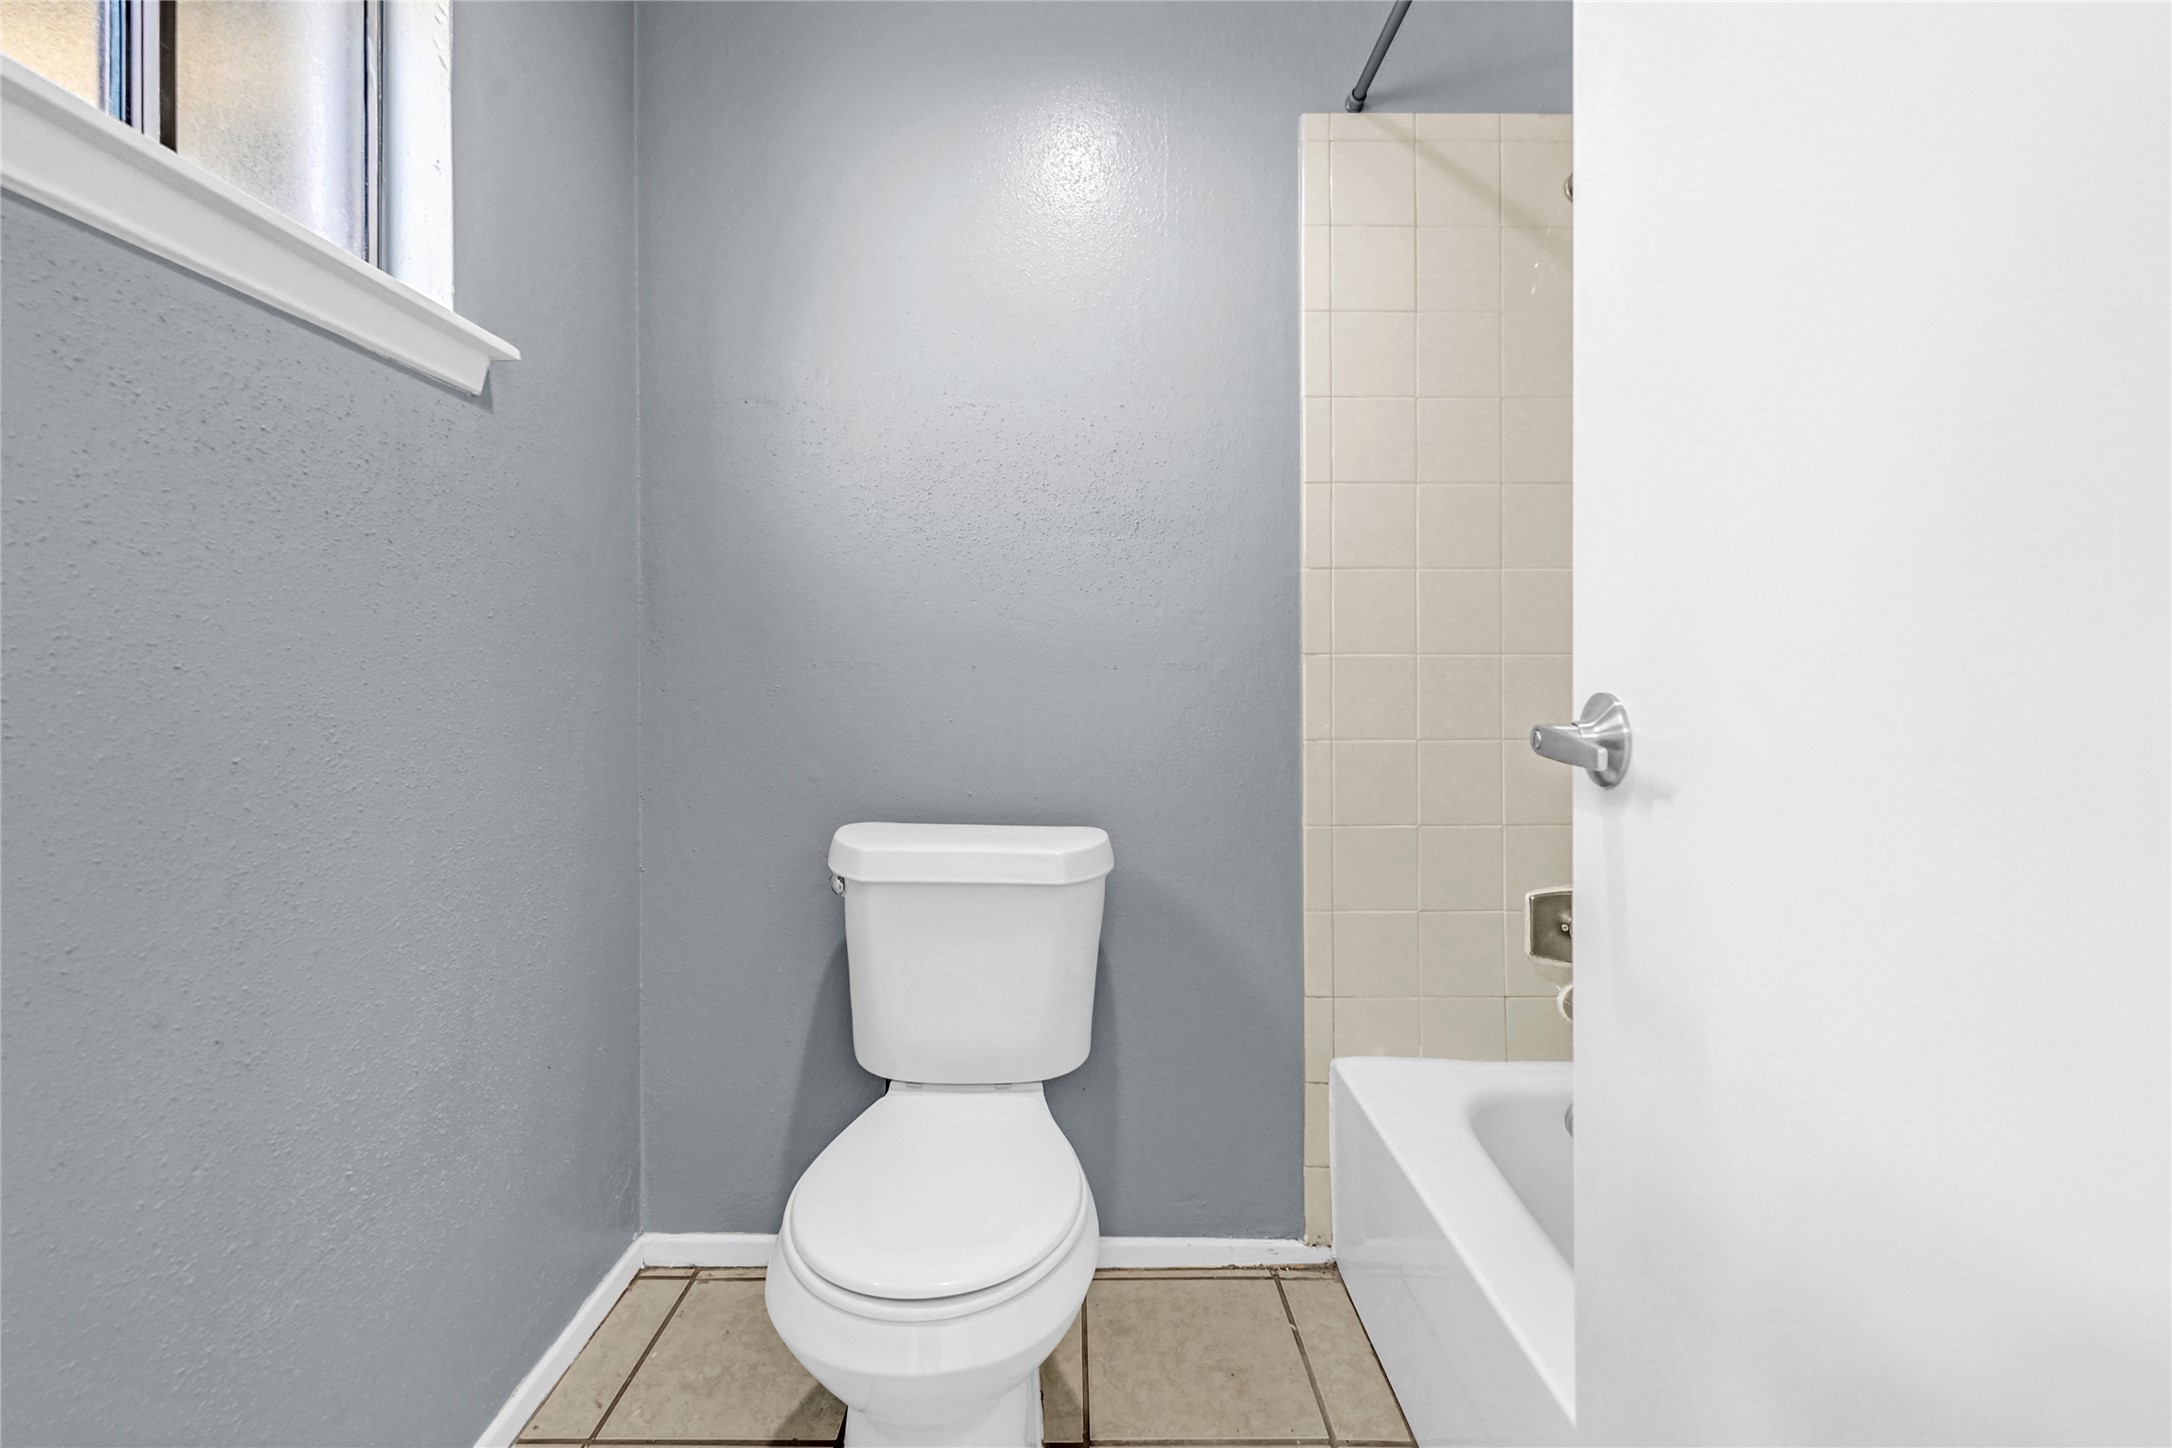 Clean and neutral, the primary bathroom awaits your personal touch.